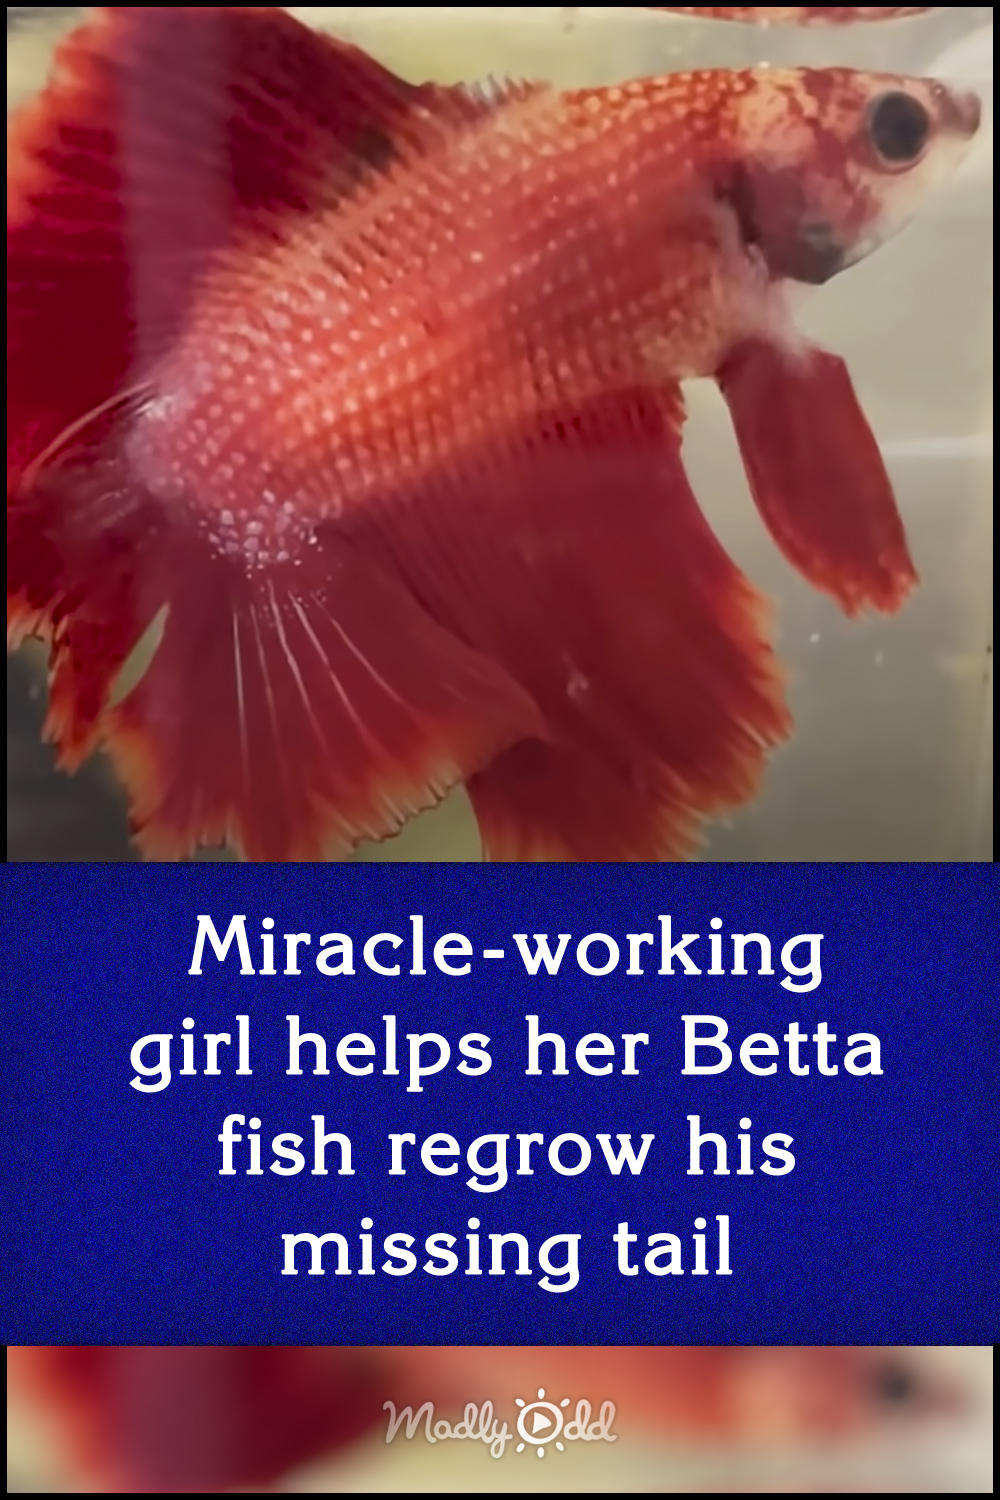 Miracle-working girl helps her Betta fish regrow his missing tail